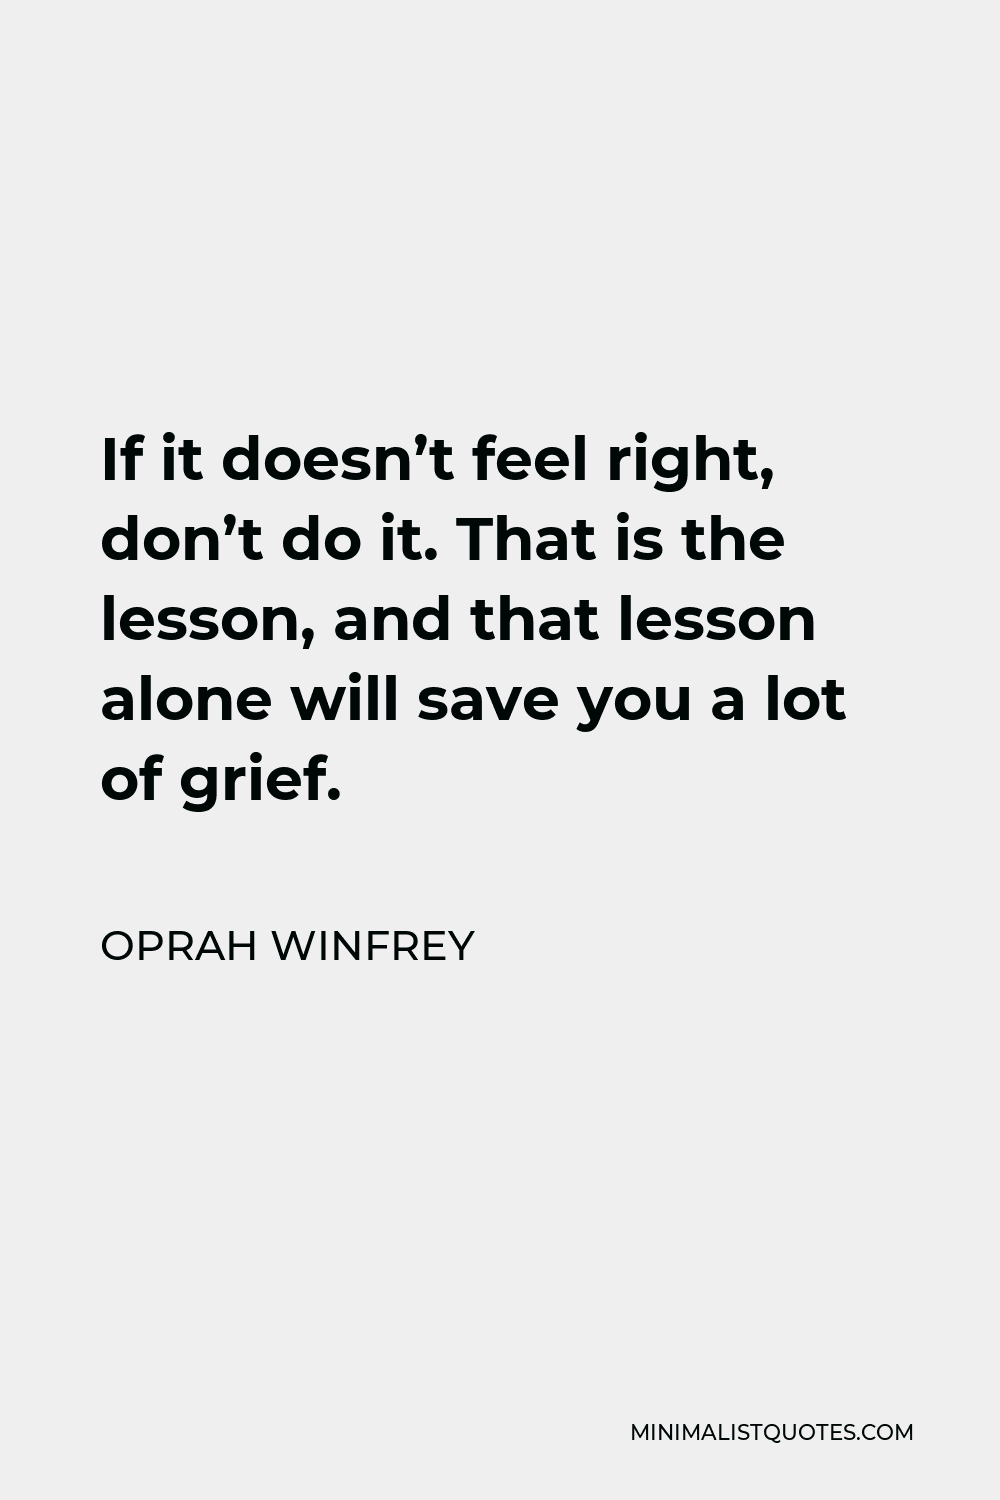 Oprah Winfrey Quote - If it doesn’t feel right, don’t do it. That is the lesson, and that lesson alone will save you a lot of grief.